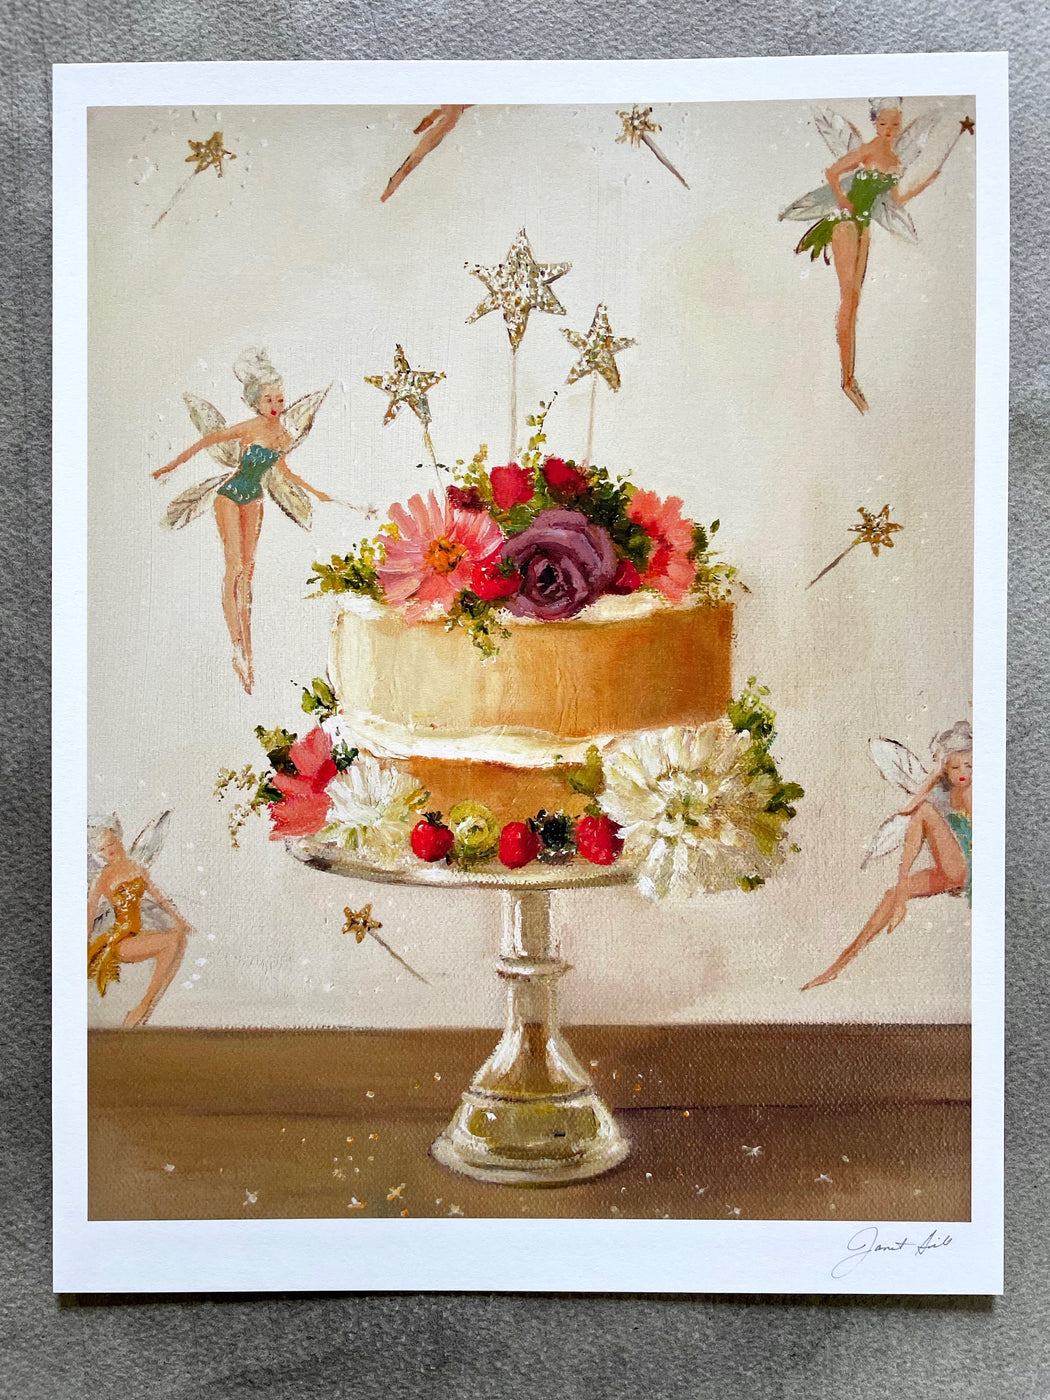 "Fairy Cake" by Janet Hill